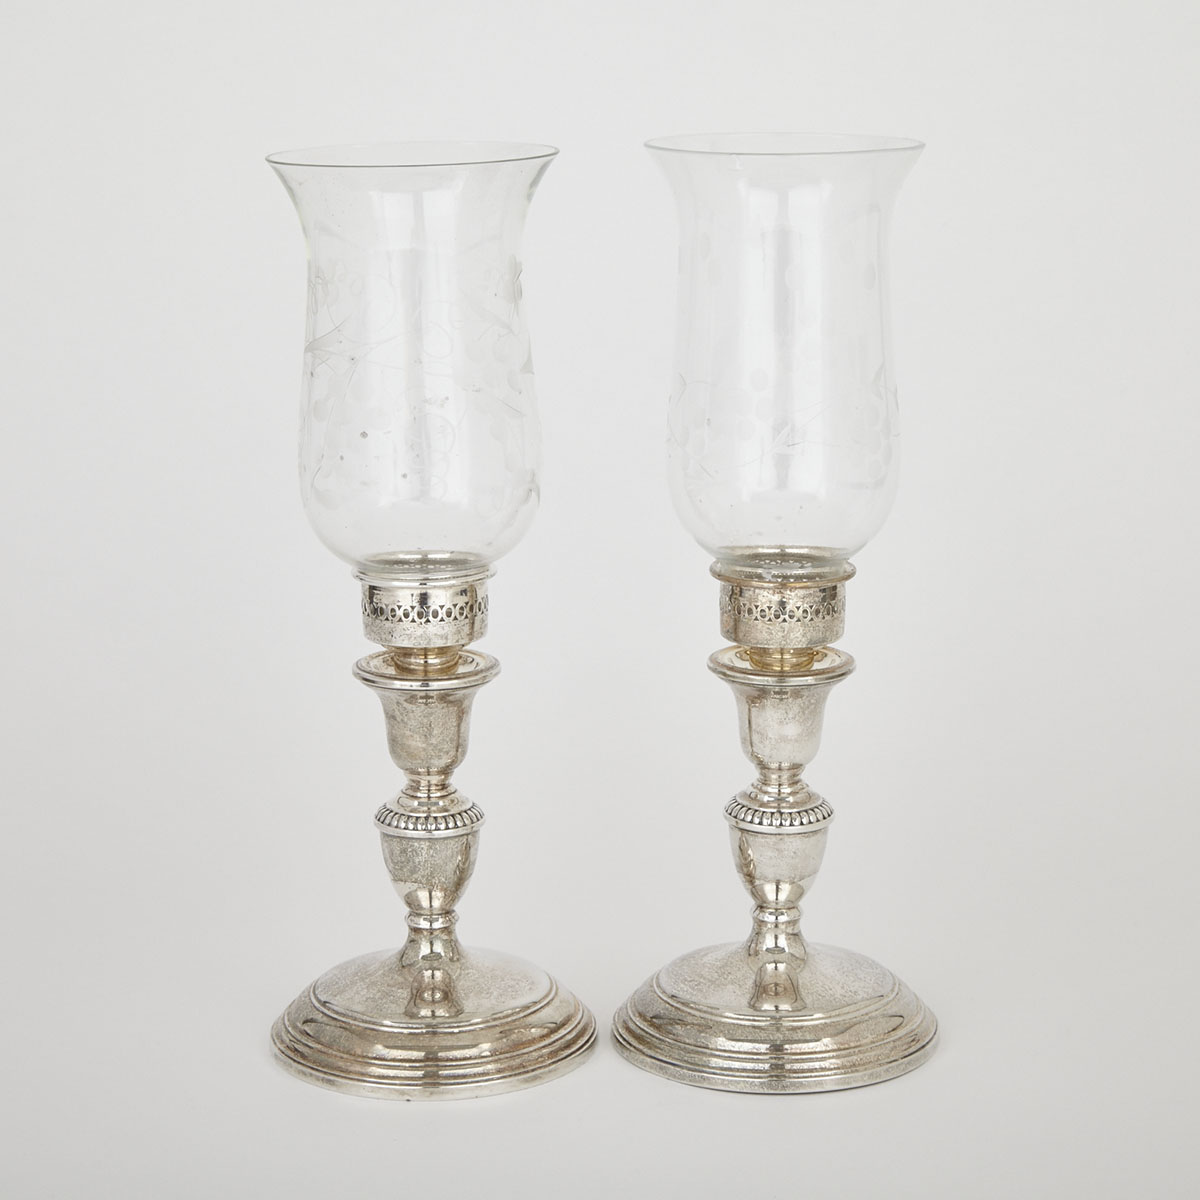 Pair of Canadian Silver Candlesticks, Henry Birks & Sons, Montreal, Que., 20th century